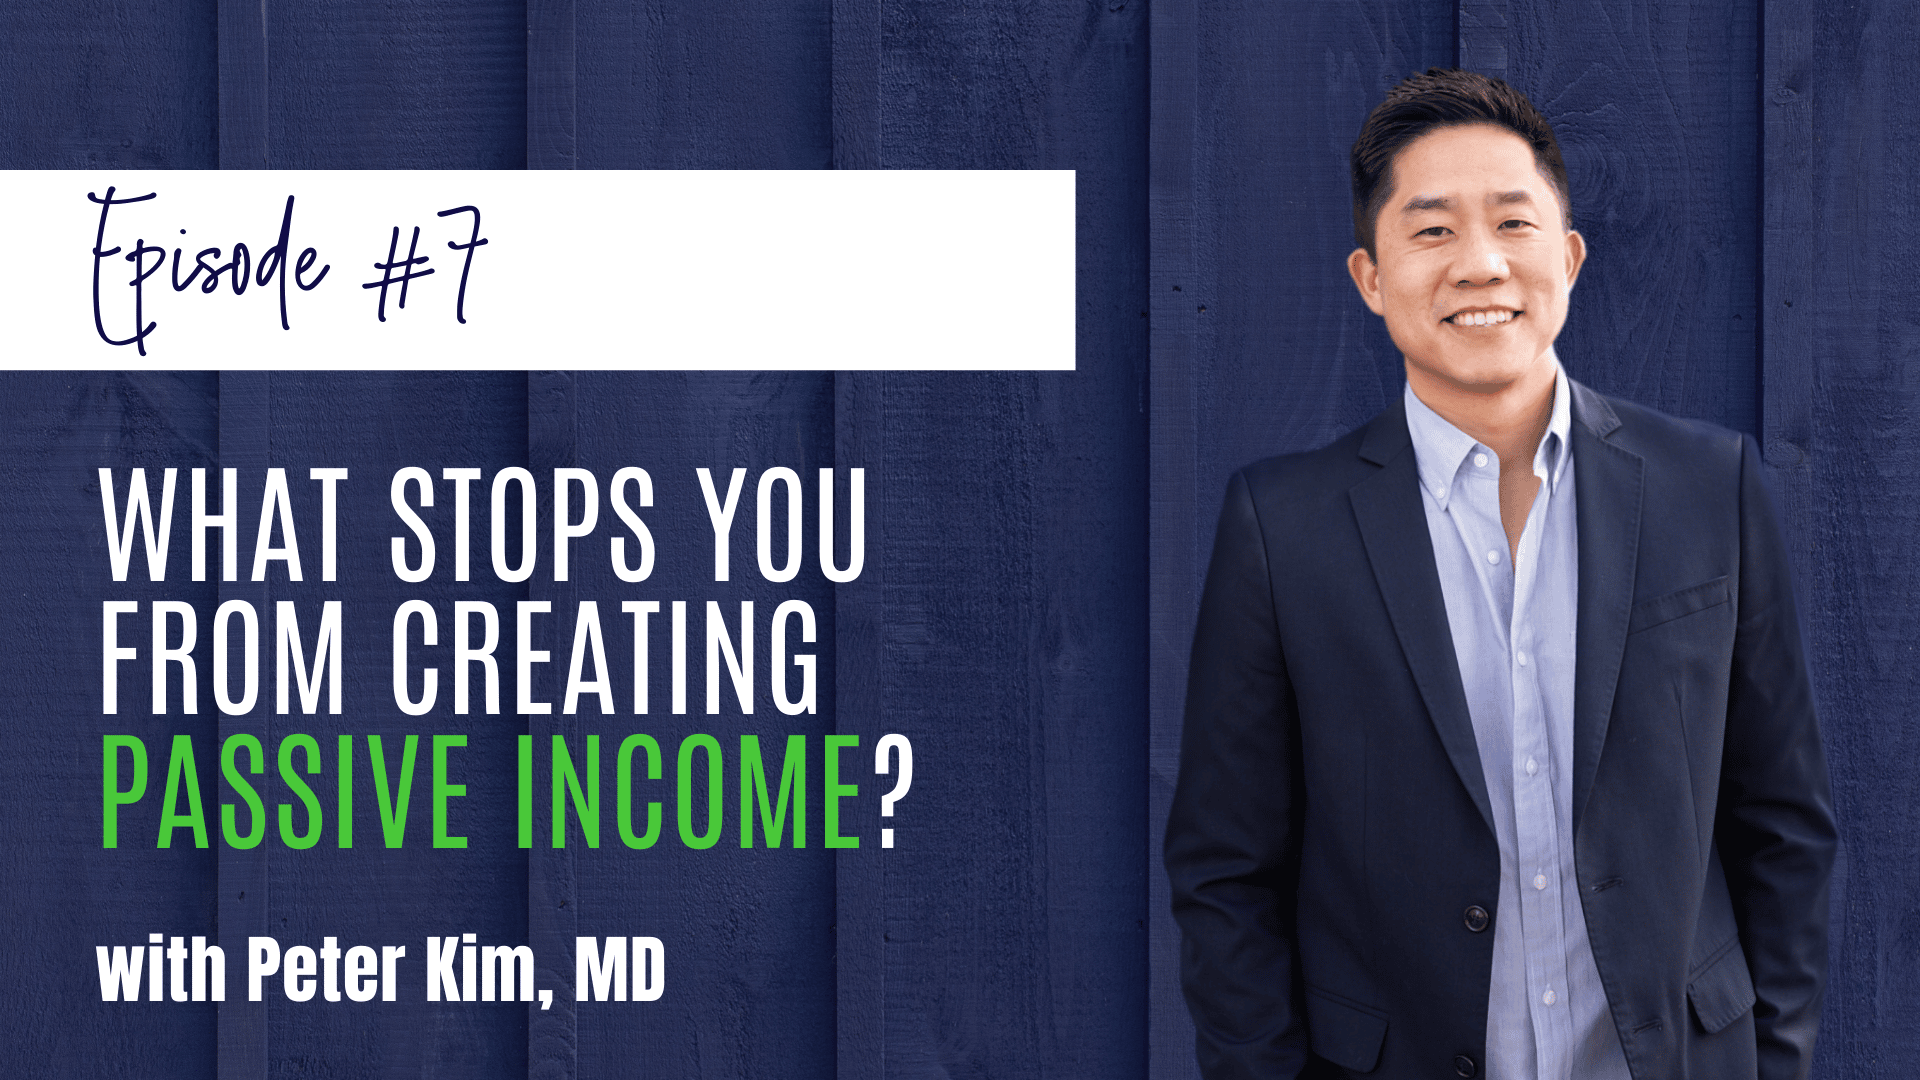 Episode 7 of the Passive Income MD Podcast: What Stops You From Creating Passive Income?